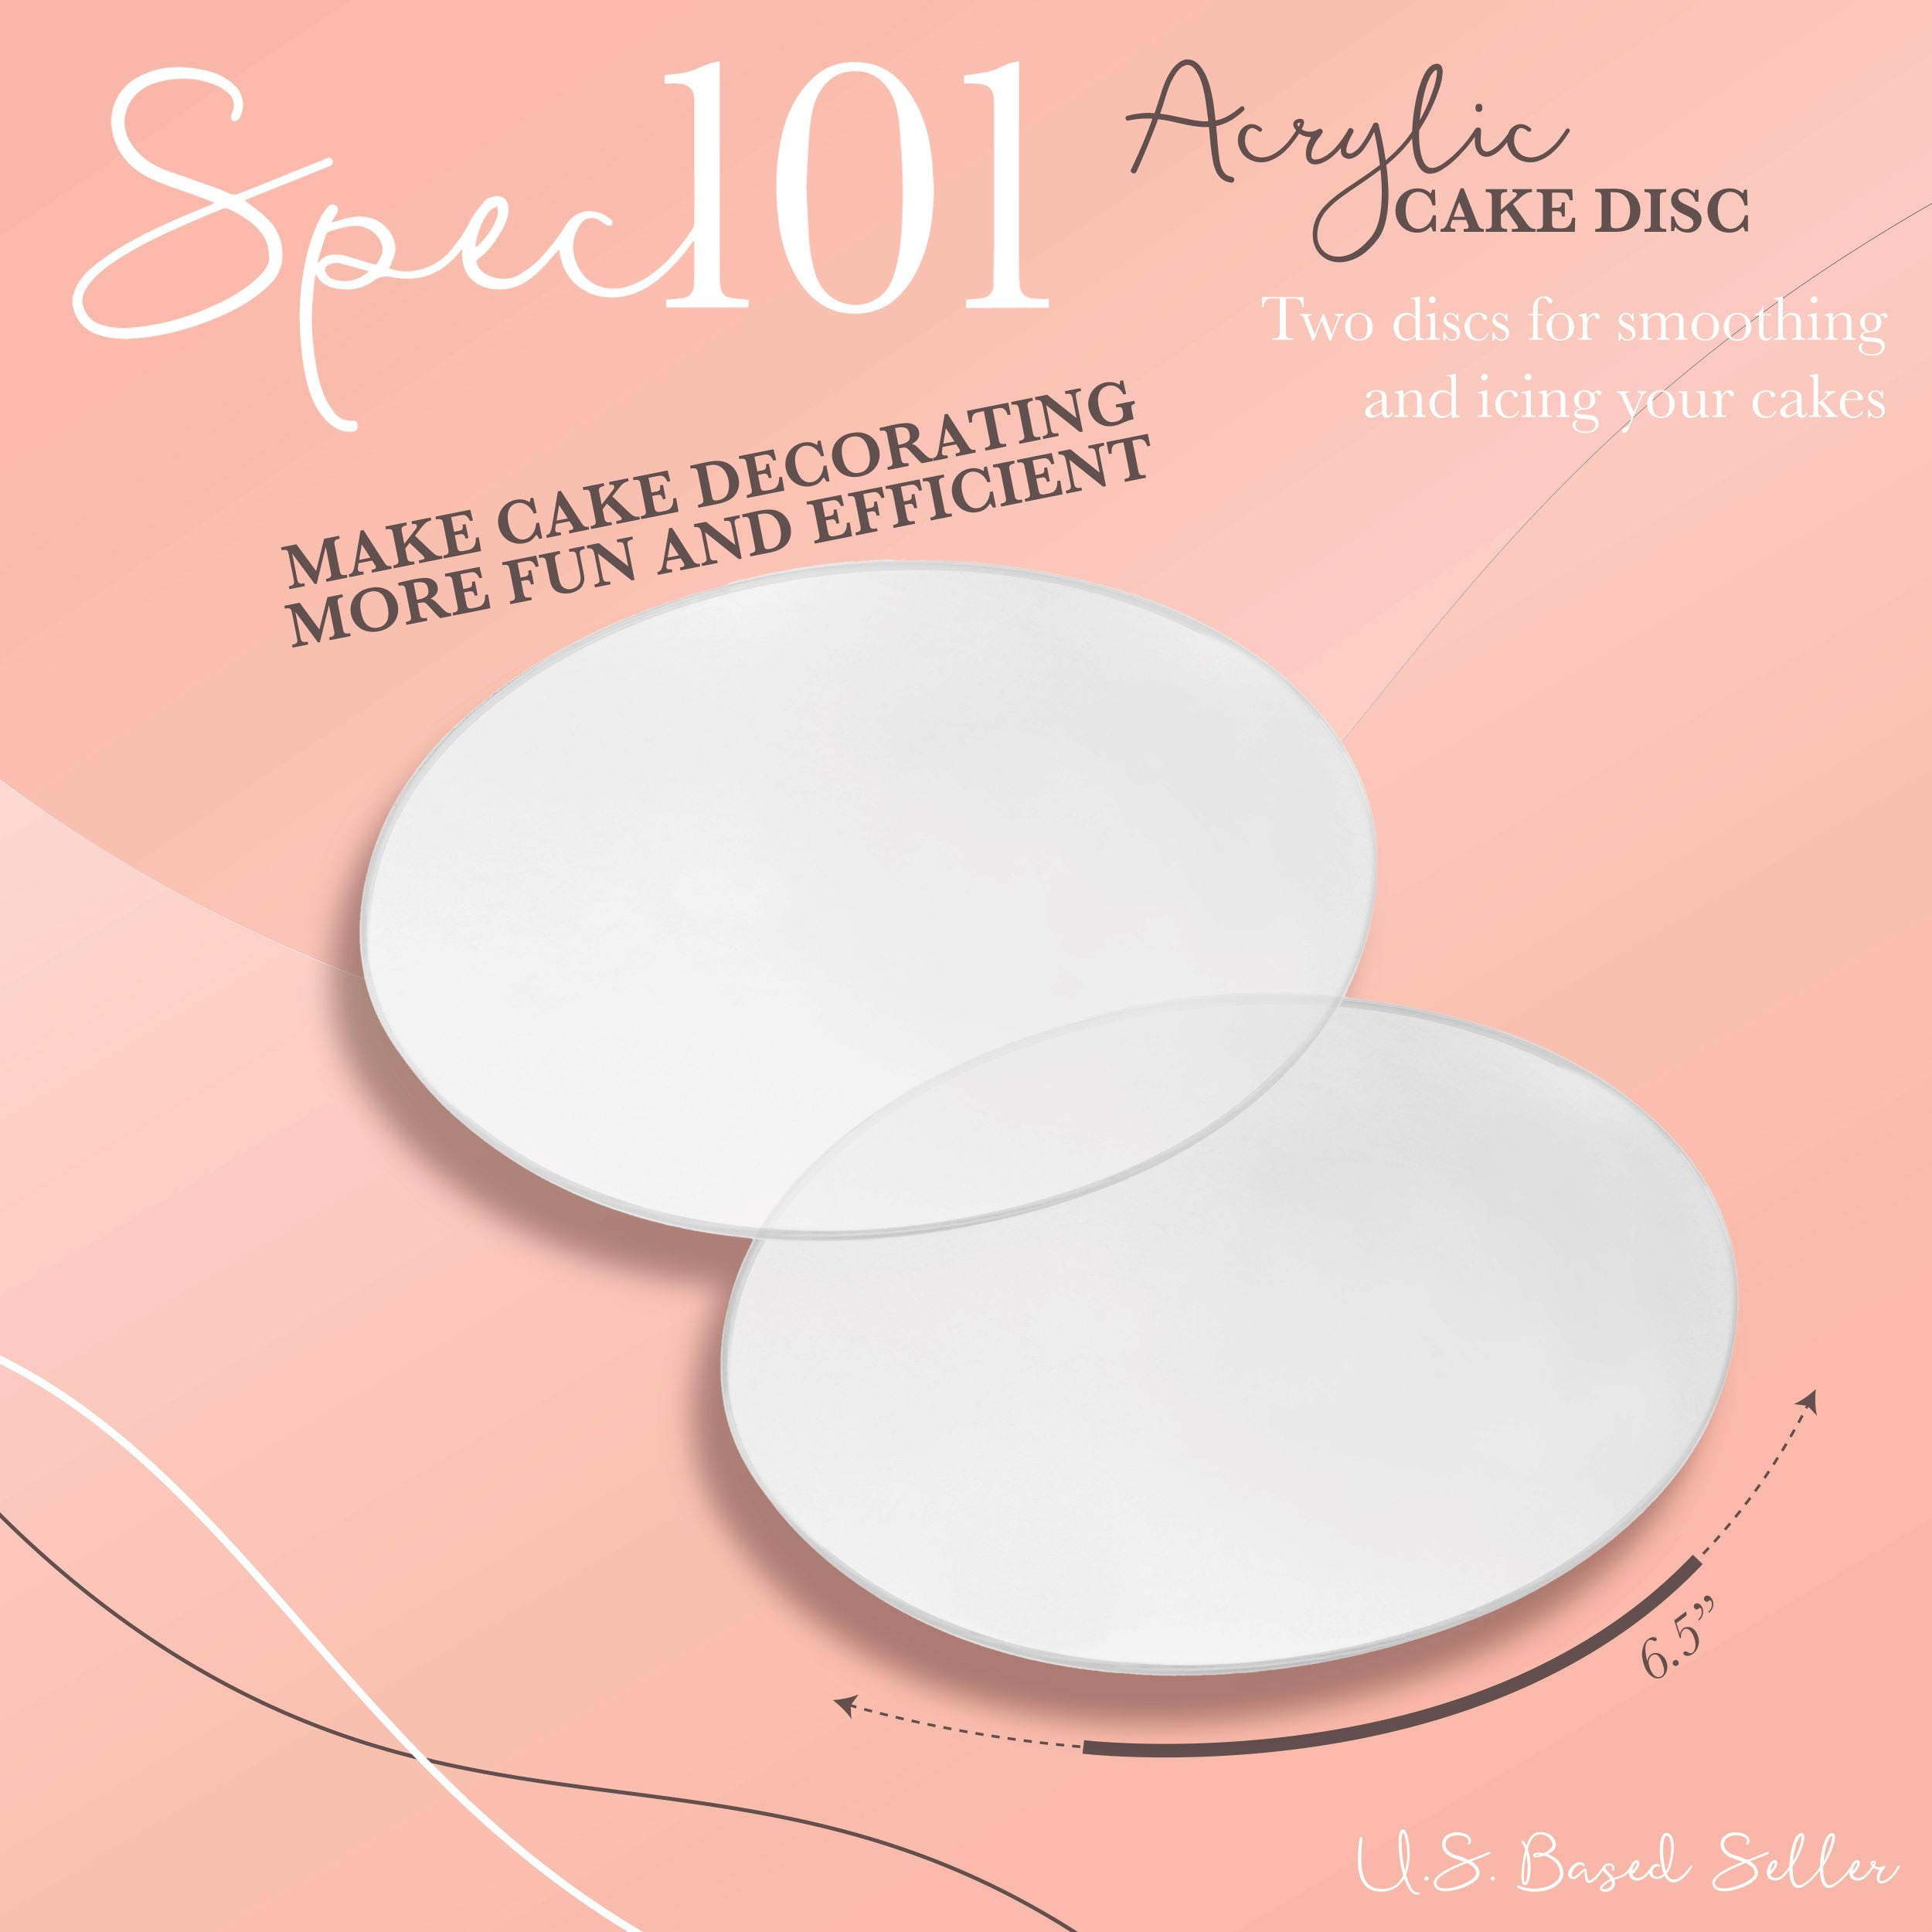 Acrylic disc 7.25 set of 2 - Bake Your Cakes